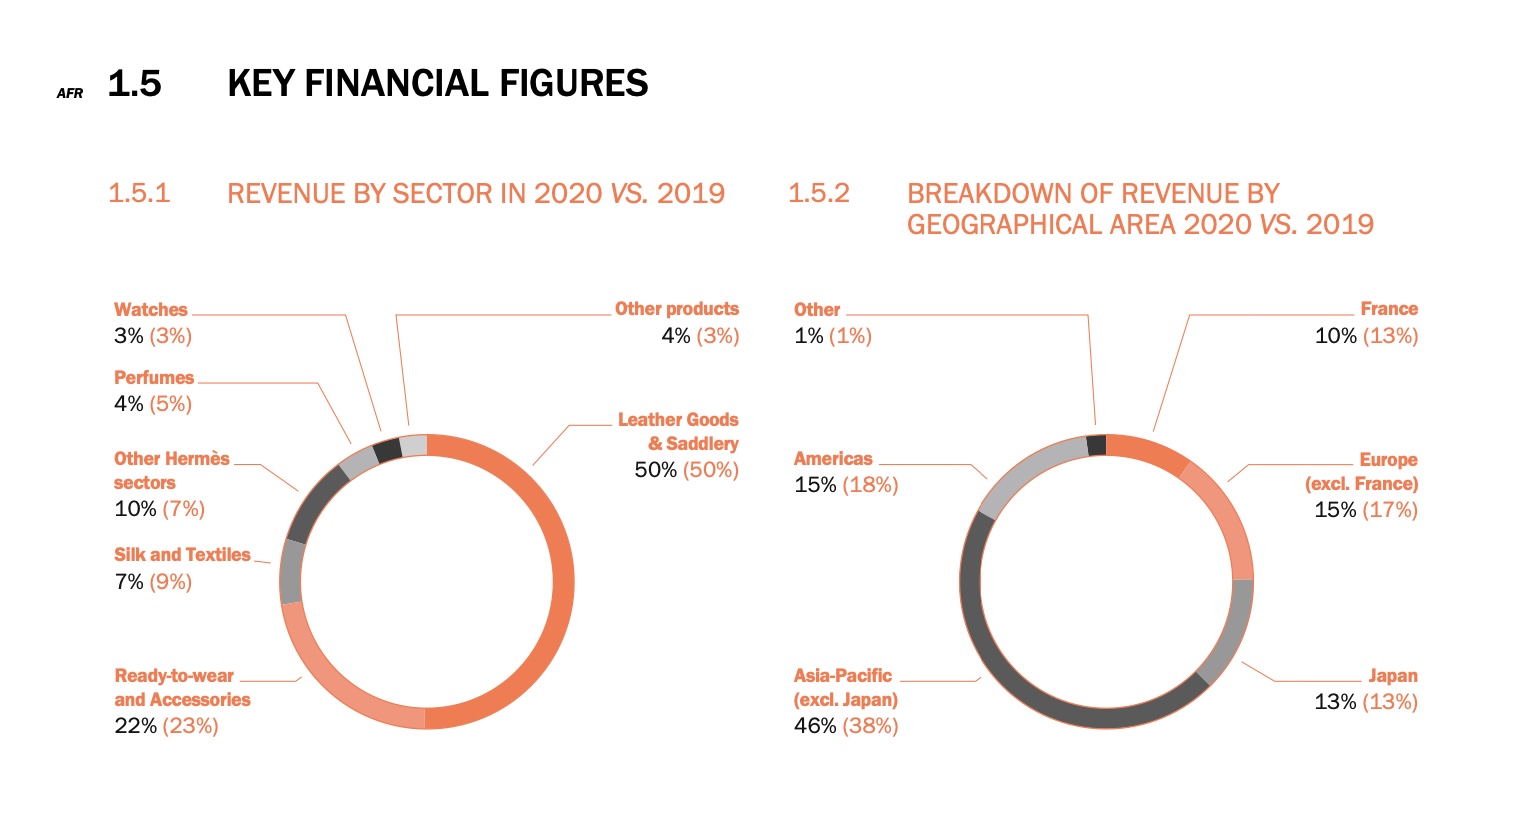 From page 26 of the Annual Report: 1.5 Key Financial Figures